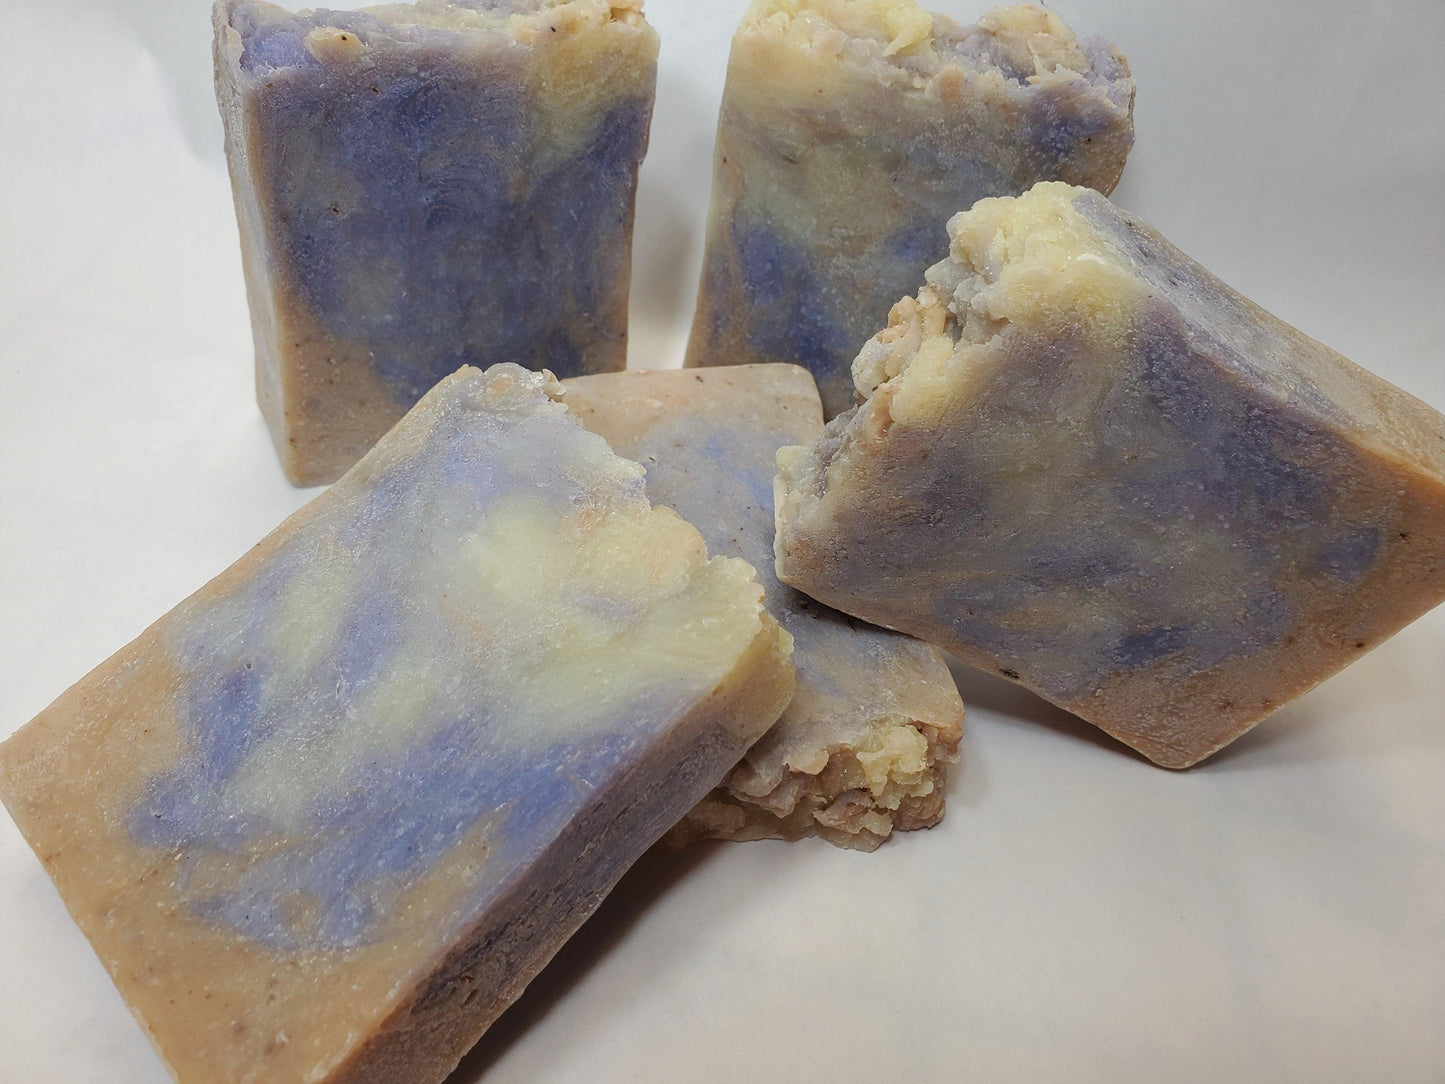 SWEET BLISS - with lemon, lavender & sandalwood - Rustic Country Soaps & More